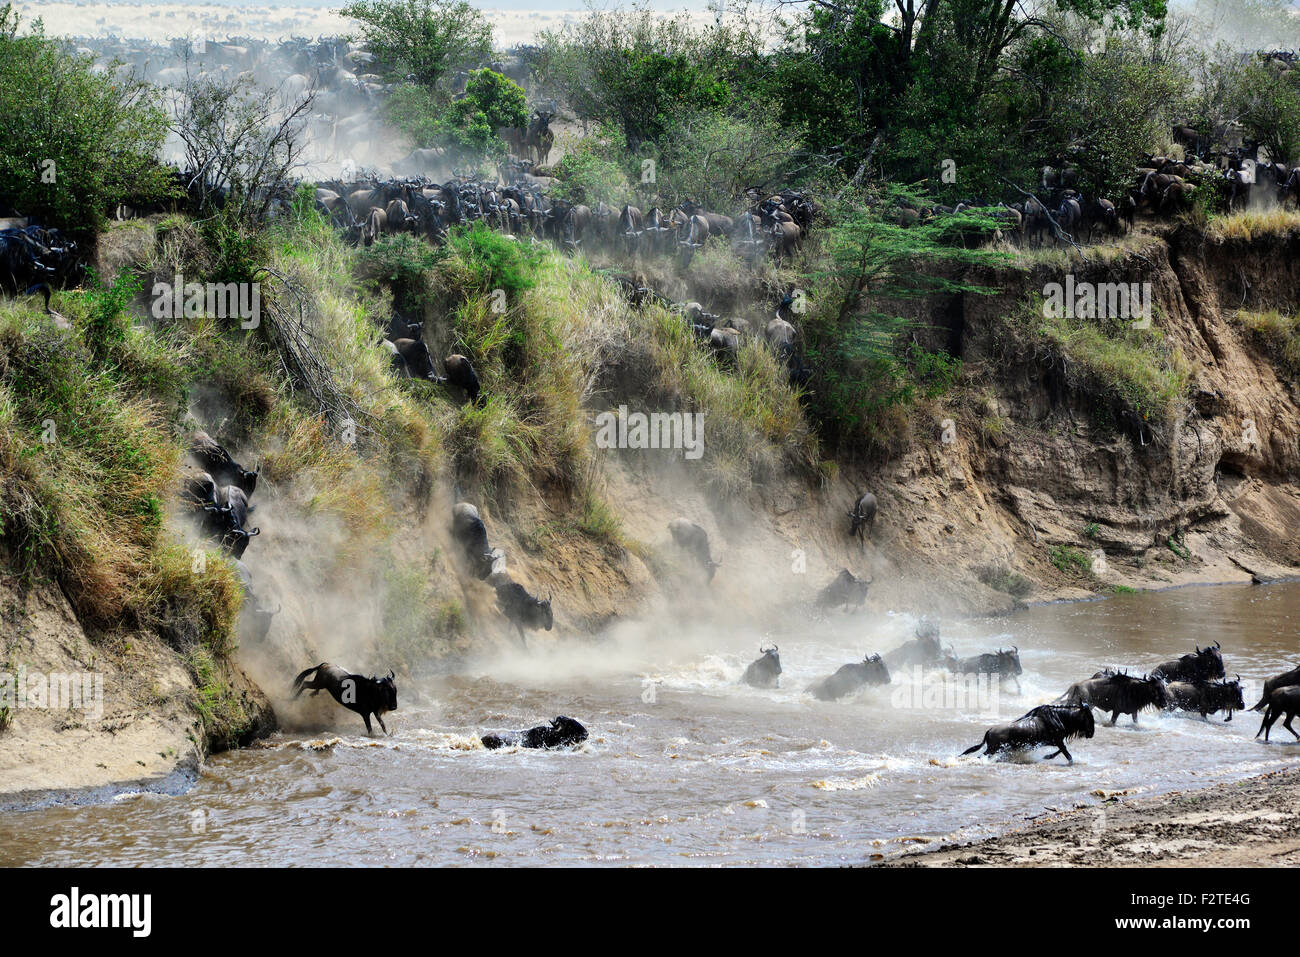 One of the most dramatic river crossings of recent years. Stock Photo